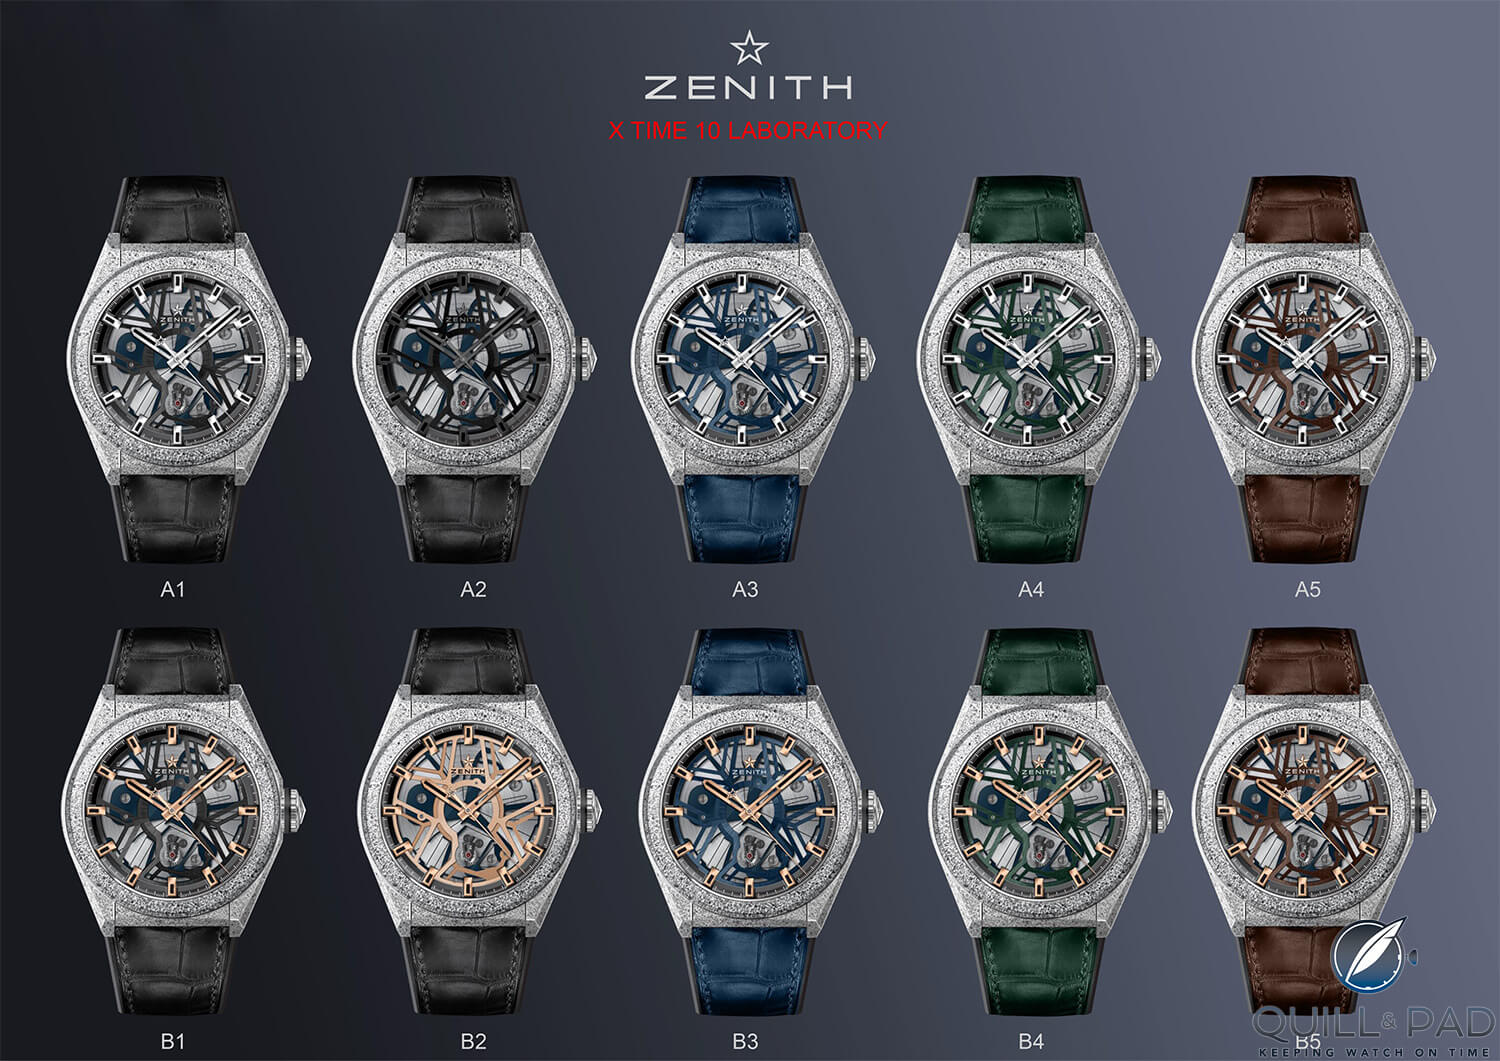 The Zenith Defy Lab was introduced in a set of 10 unique pieces